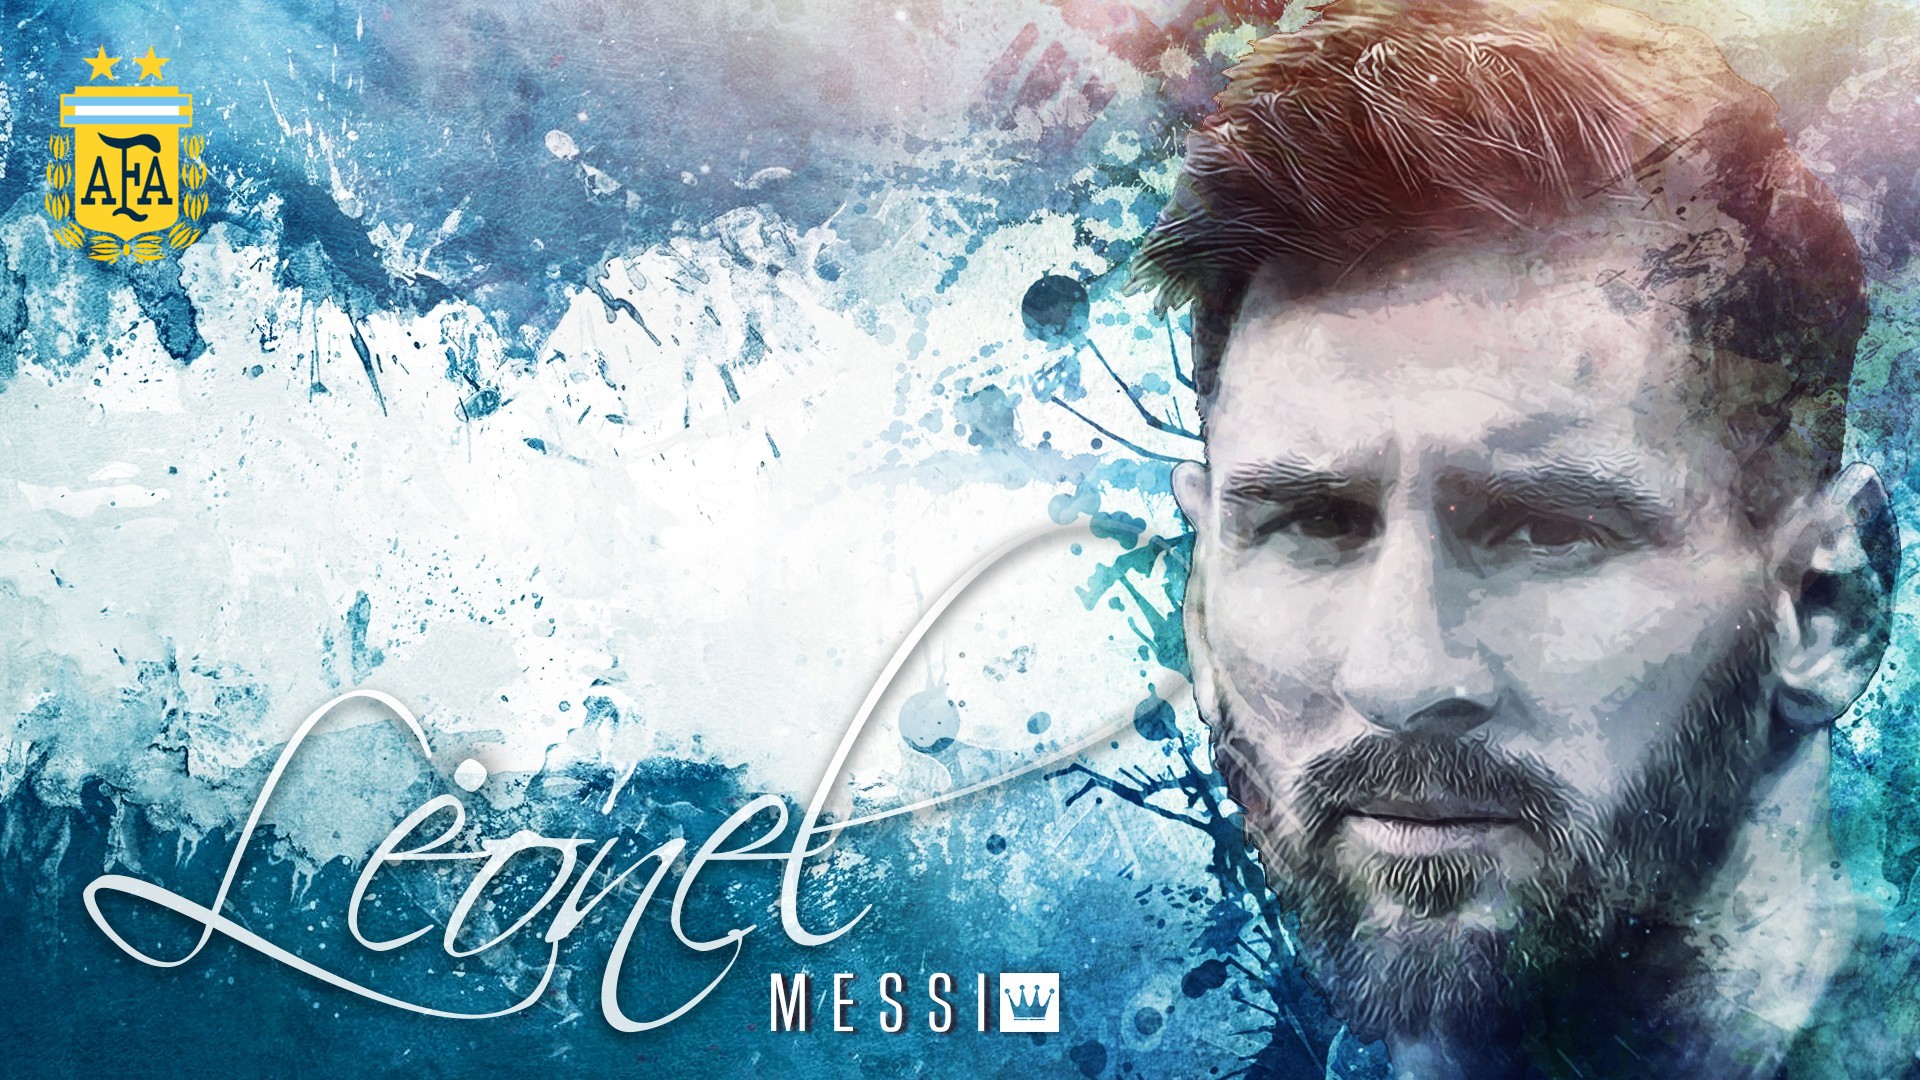 Wallpaper Desktop Messi Argentina HD With Resolution 1920X1080 pixel. You can make this wallpaper for your Mac or Windows Desktop Background, iPhone, Android or Tablet and another Smartphone device for free